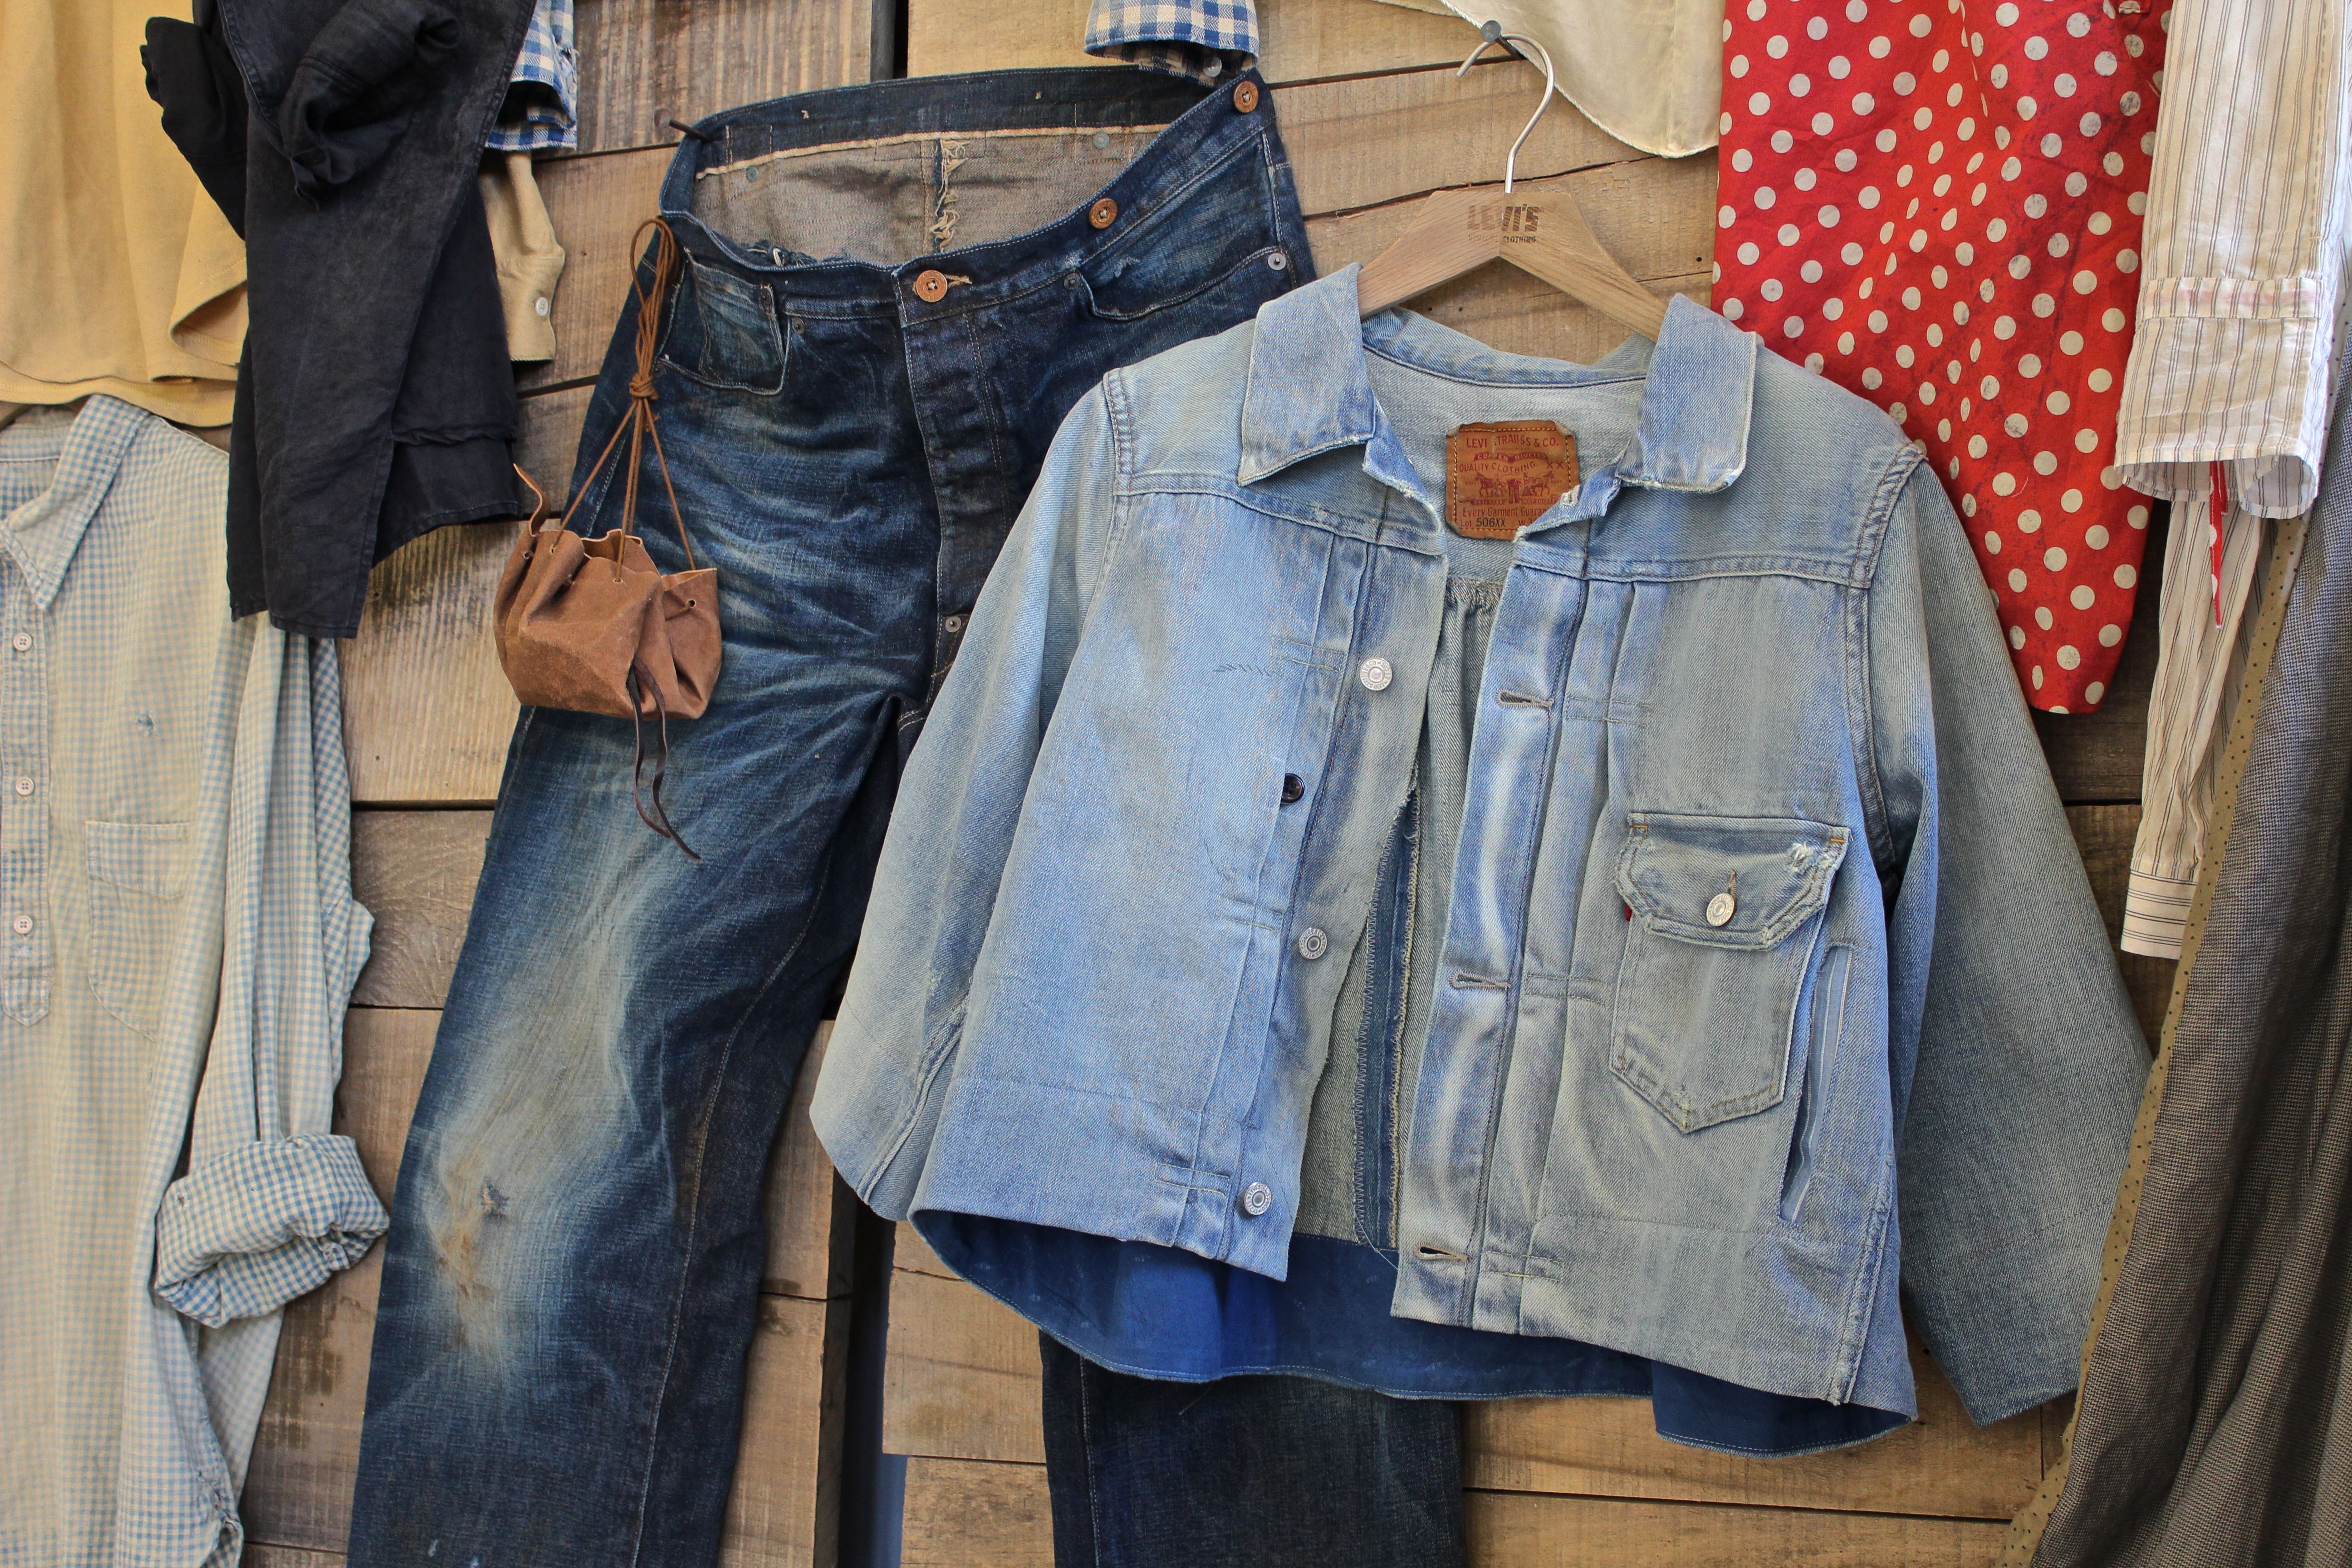 Levi's Vintage Clothing: Miners and Hot Rodders